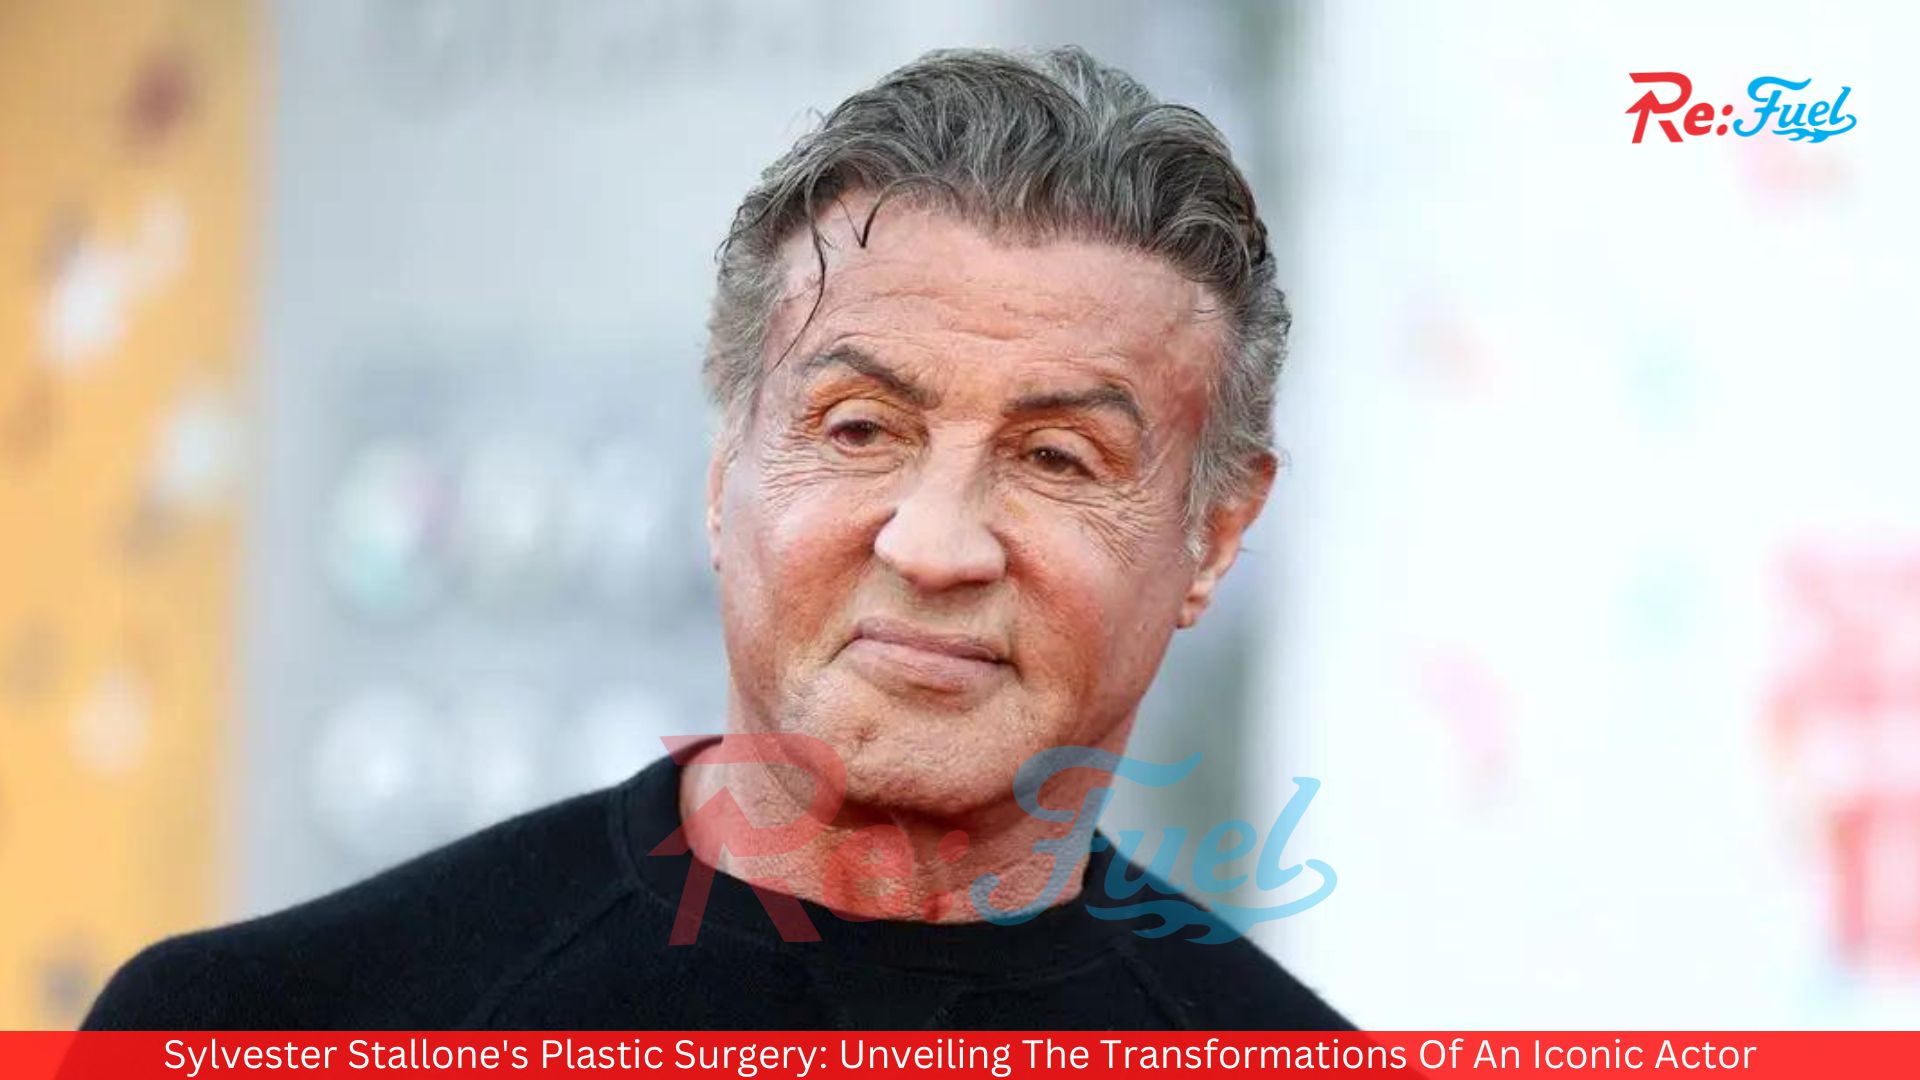 Sylvester Stallone's Plastic Surgery: Unveiling The Transformations Of An Iconic Actor